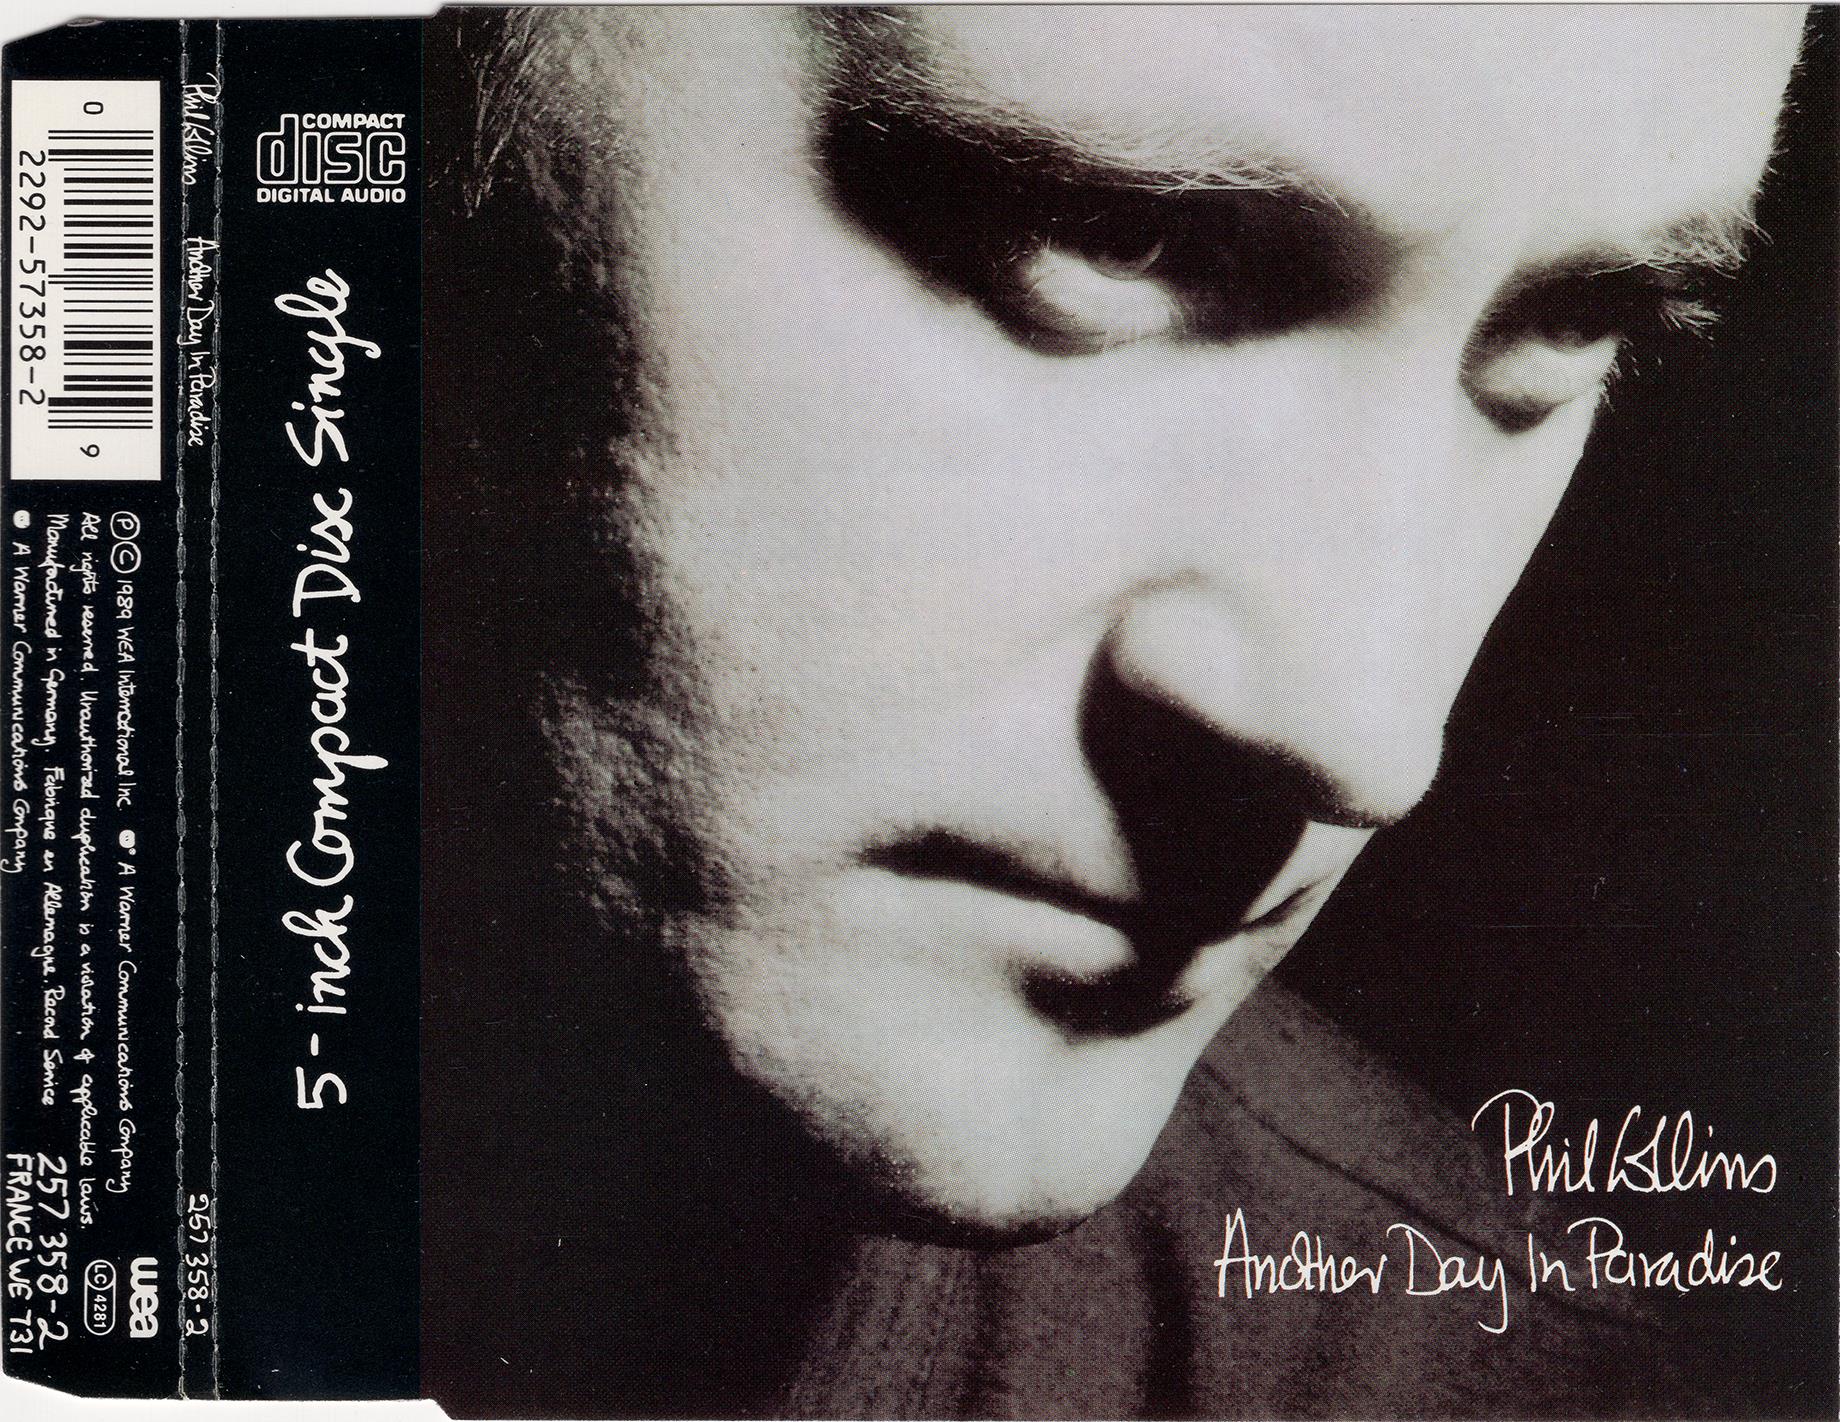 Phil Collins - Another Day In Paradise (1989)(Cdm)